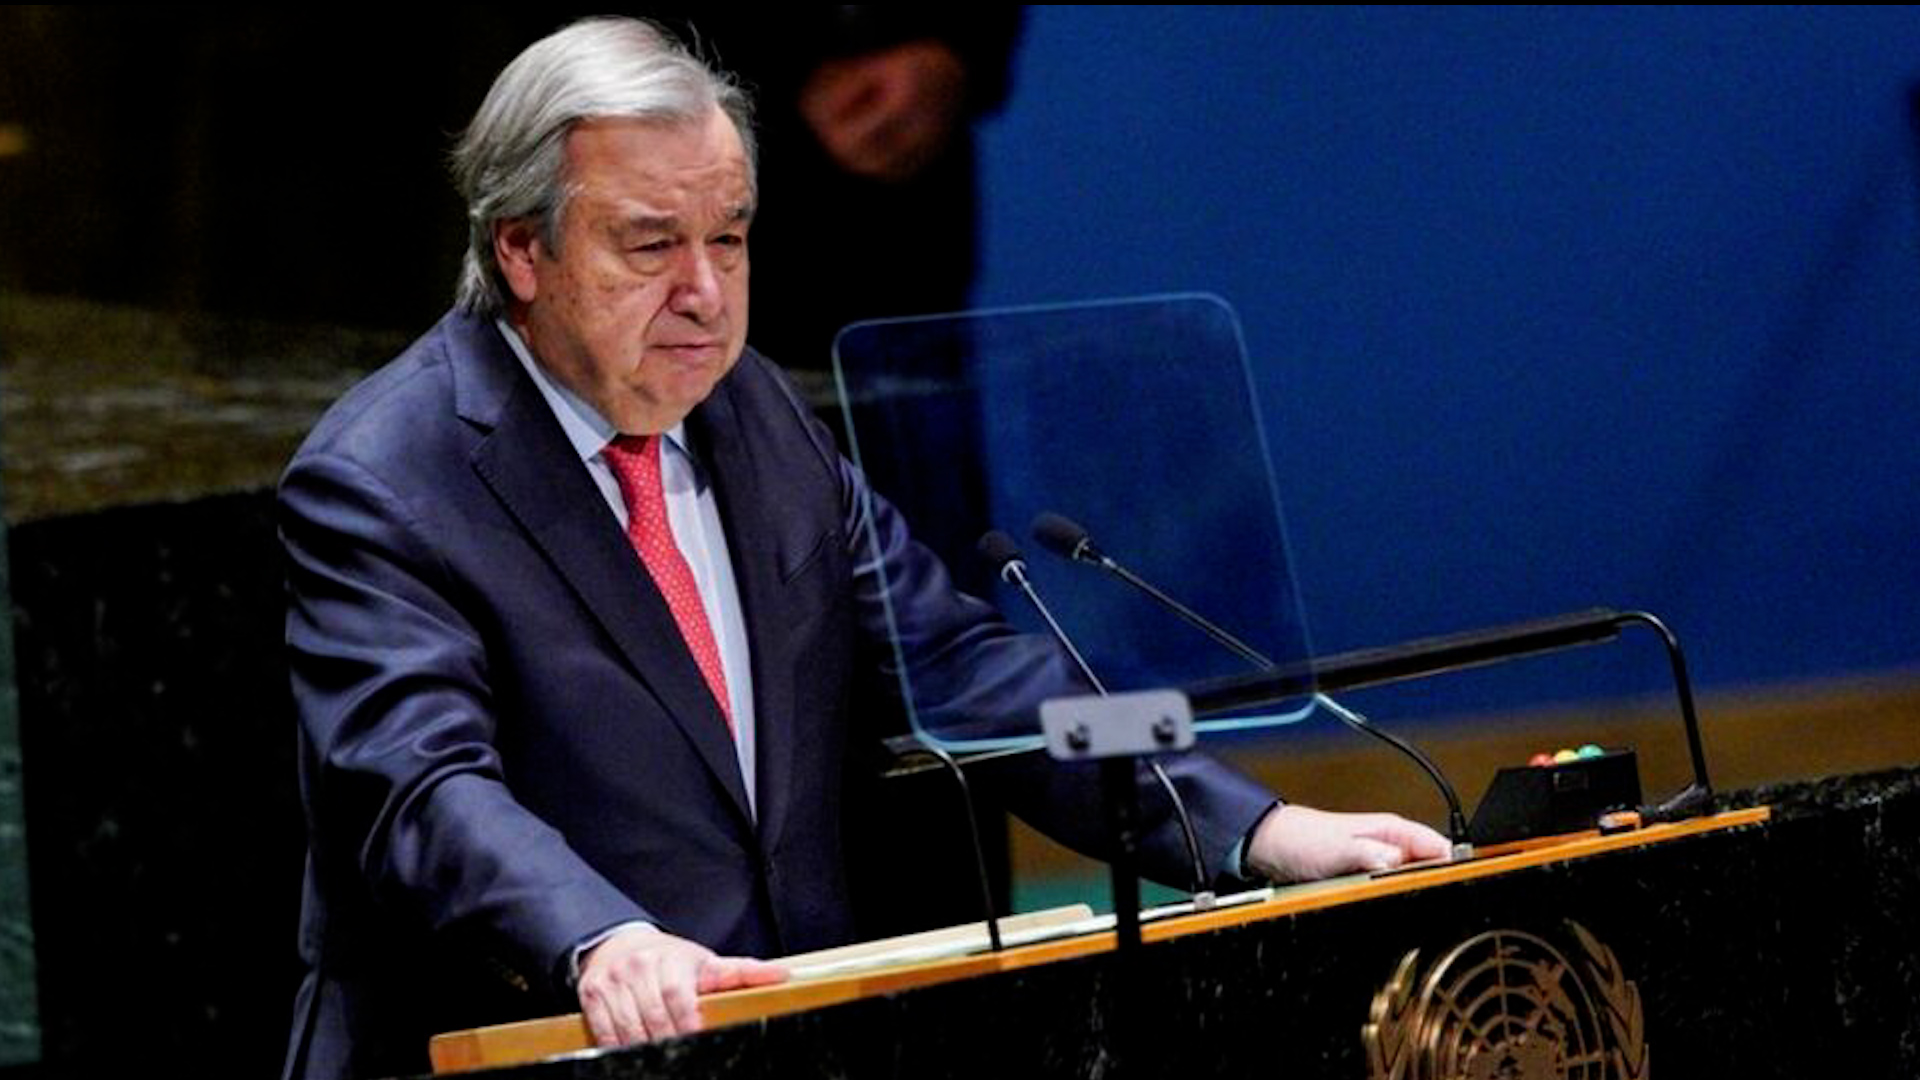 UN Secretary-General Antonio Guterres addresses the Eleventh Emergency Special Session of the UN General Assembly on Ukraine in New York, U.S., February 22, 2023. /CFP